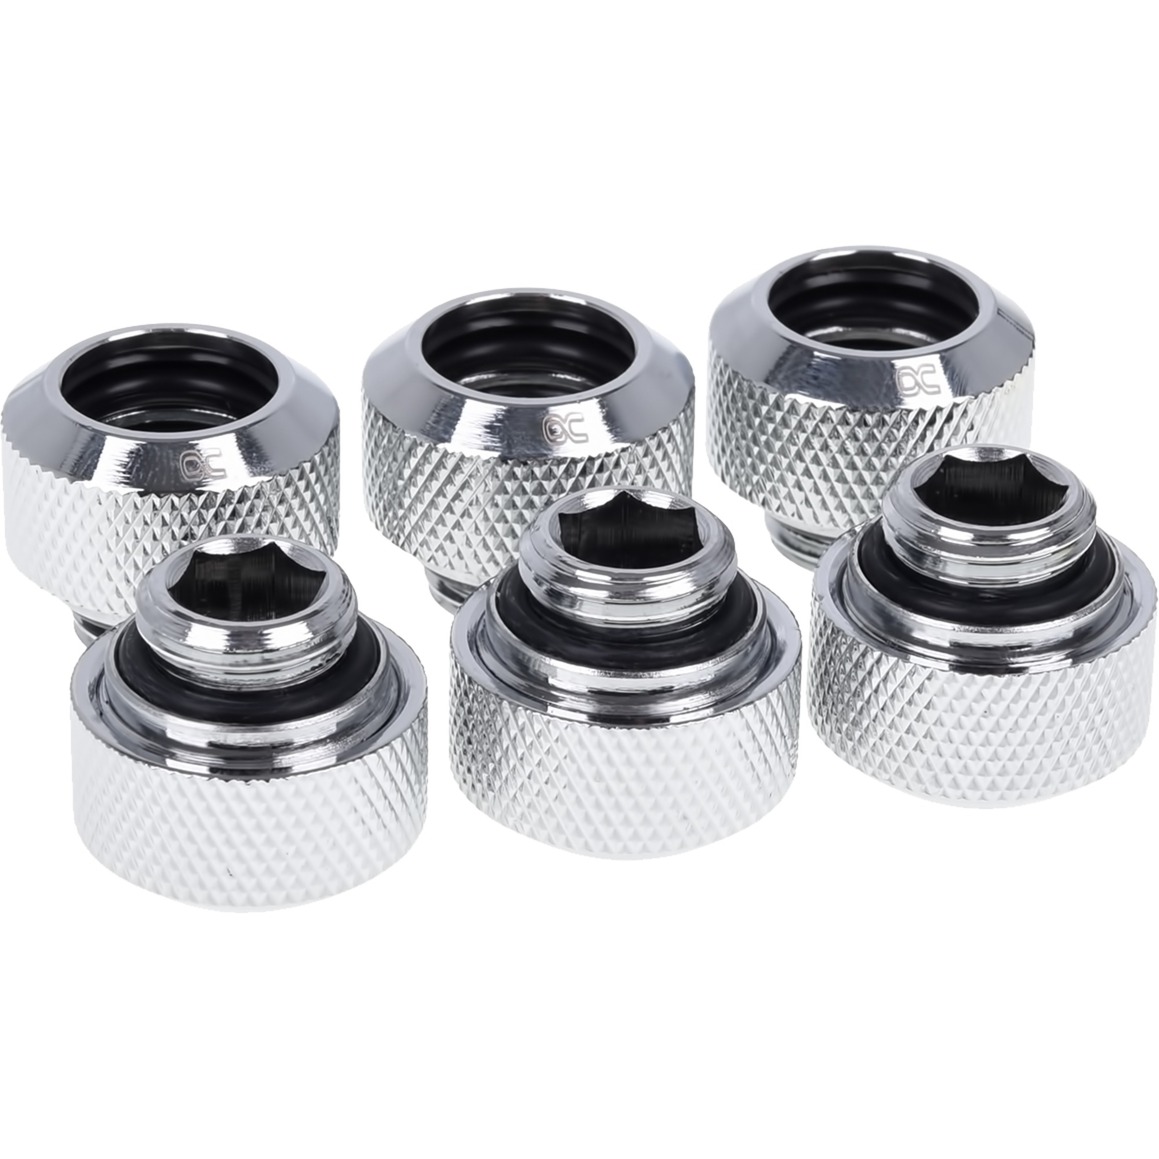 Alphacool 17376 Eiszapfen 13mm HardTube Compression Fitting G1/4, Chrome Sixpack WaterCooling Raccoring